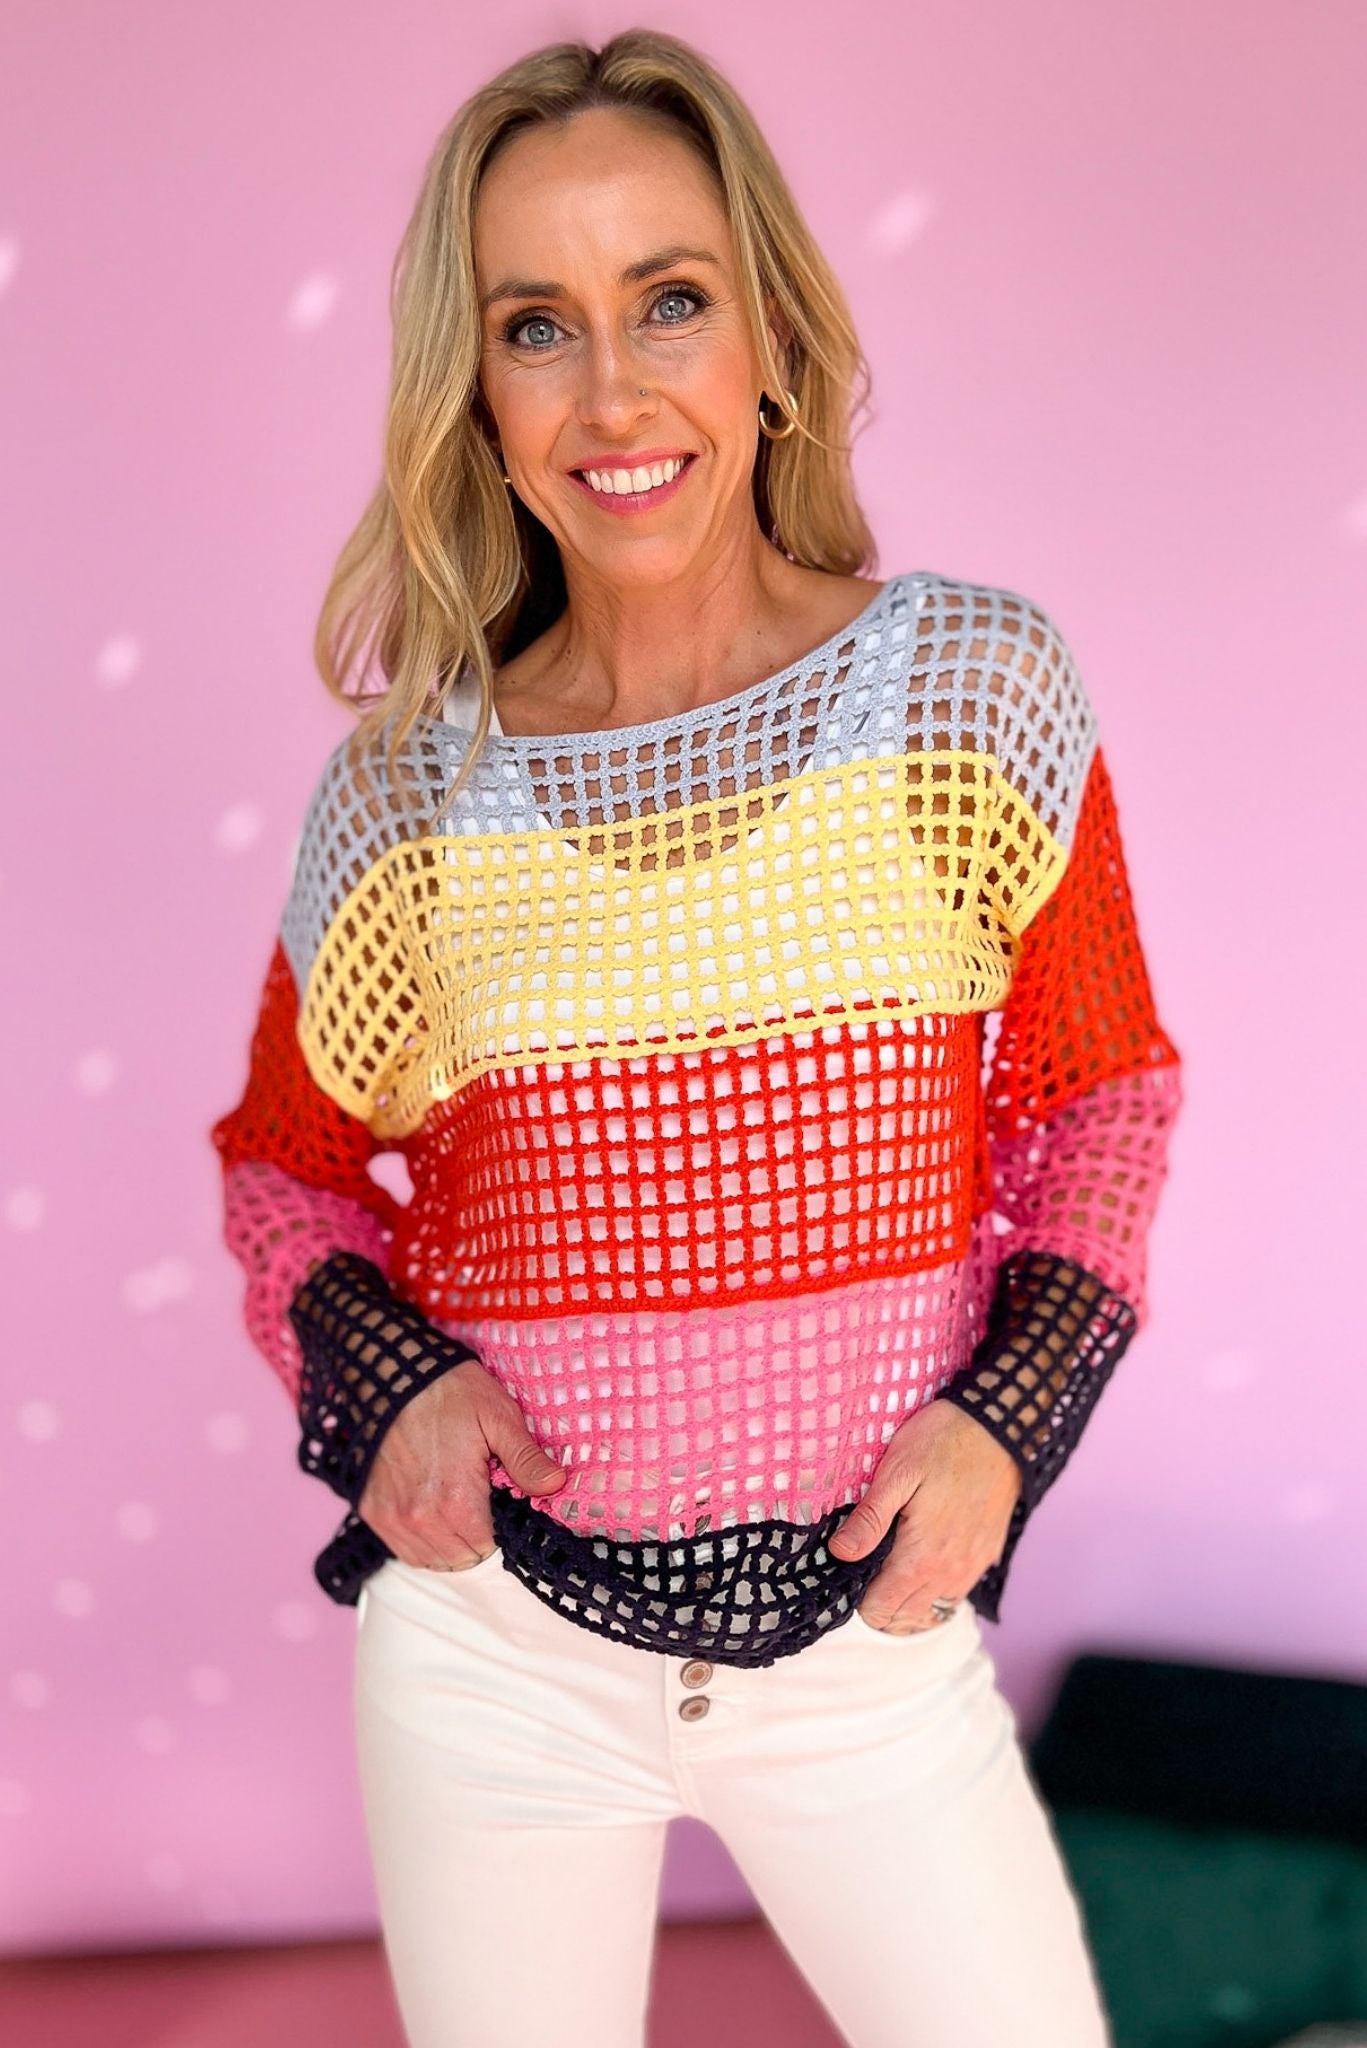 Colorful Striped Eyelet Knit Sweater, crochet top, prints and pops, spring fashion, must have, shop style your senses by mallory fitzsimmons